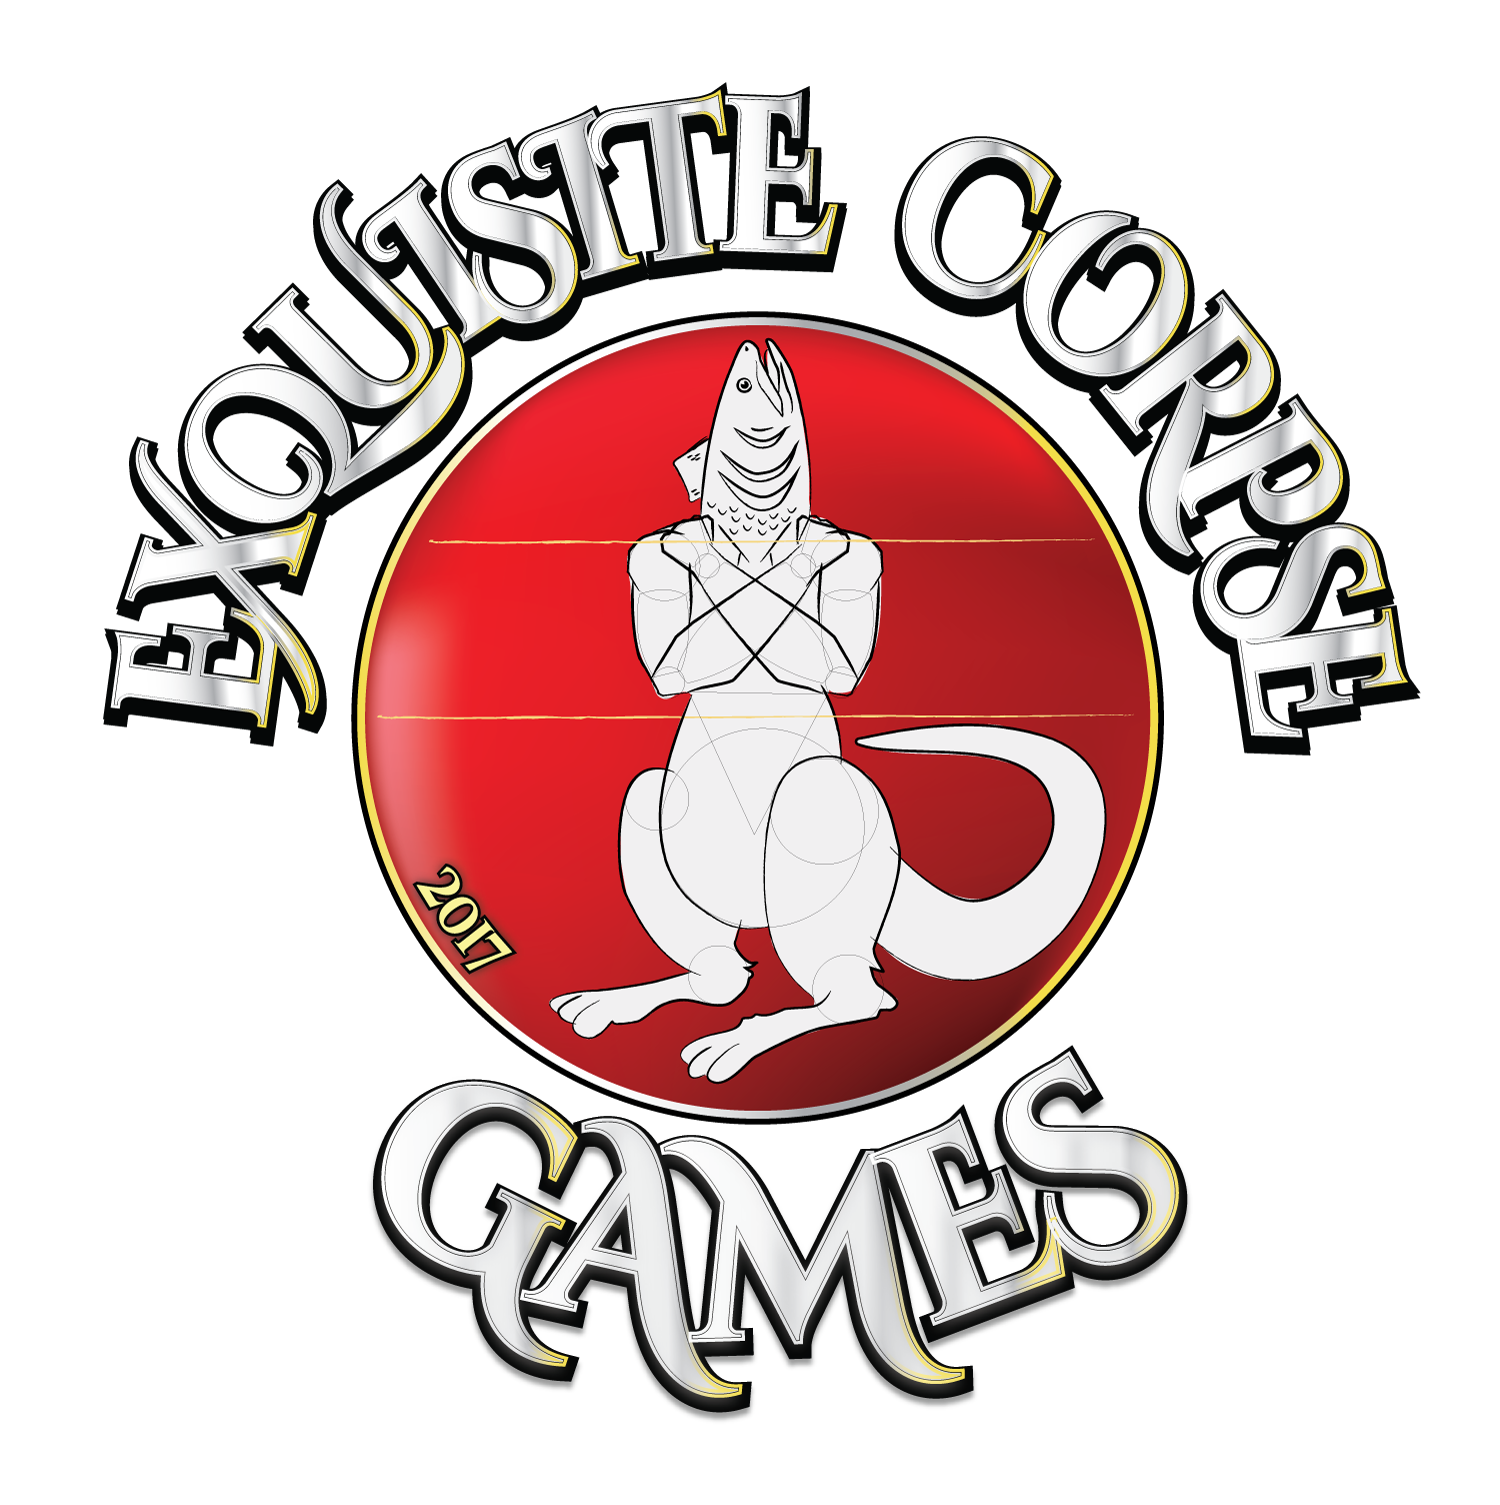 Exquisite Corpse Games 2017 unveiling Exceeded Expectations